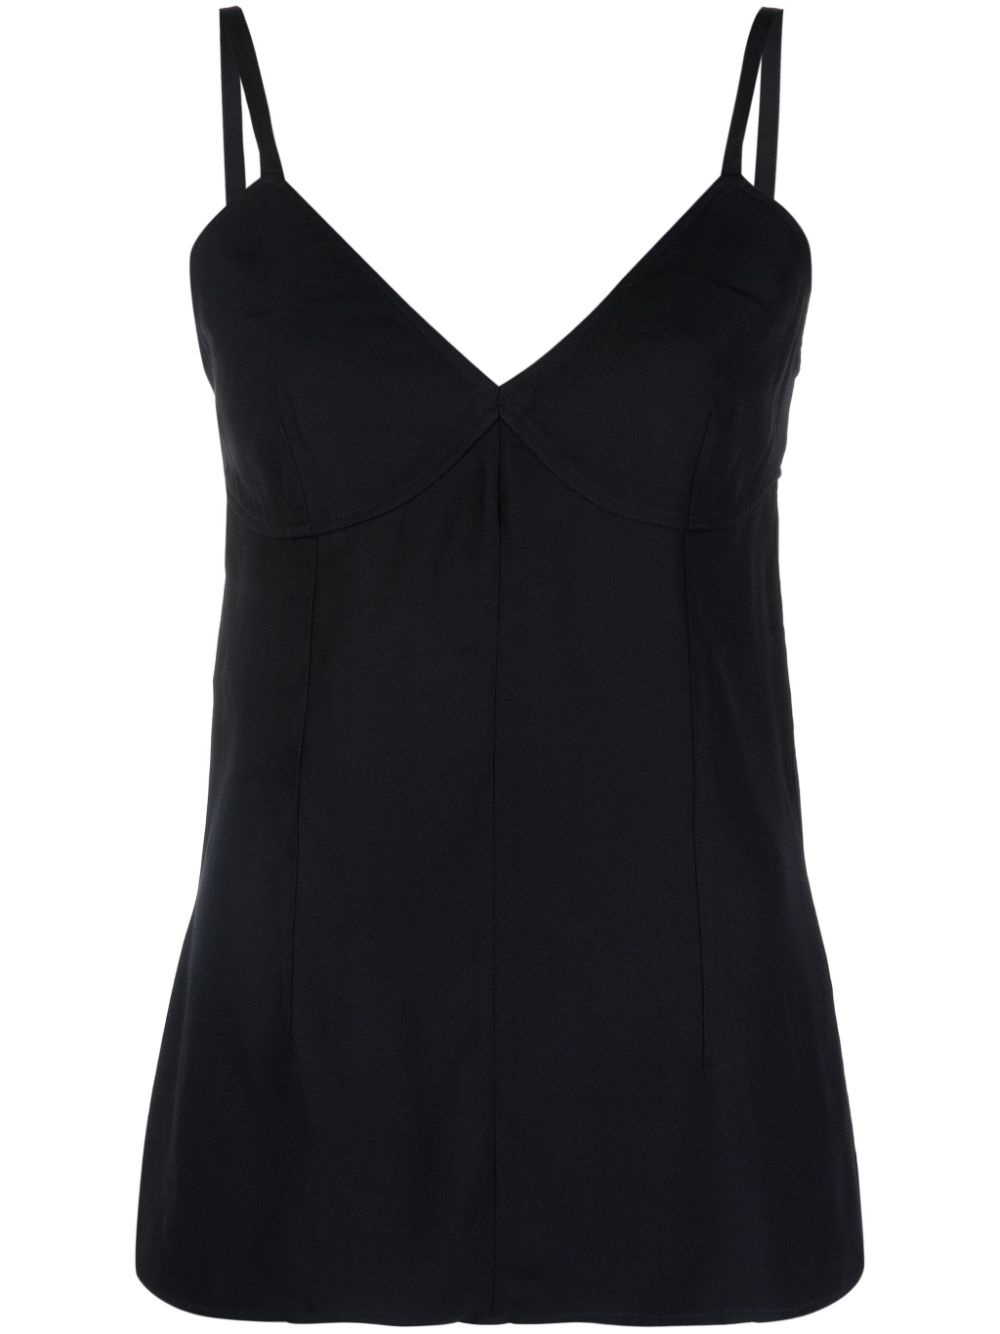 V-neck camisole top - 1